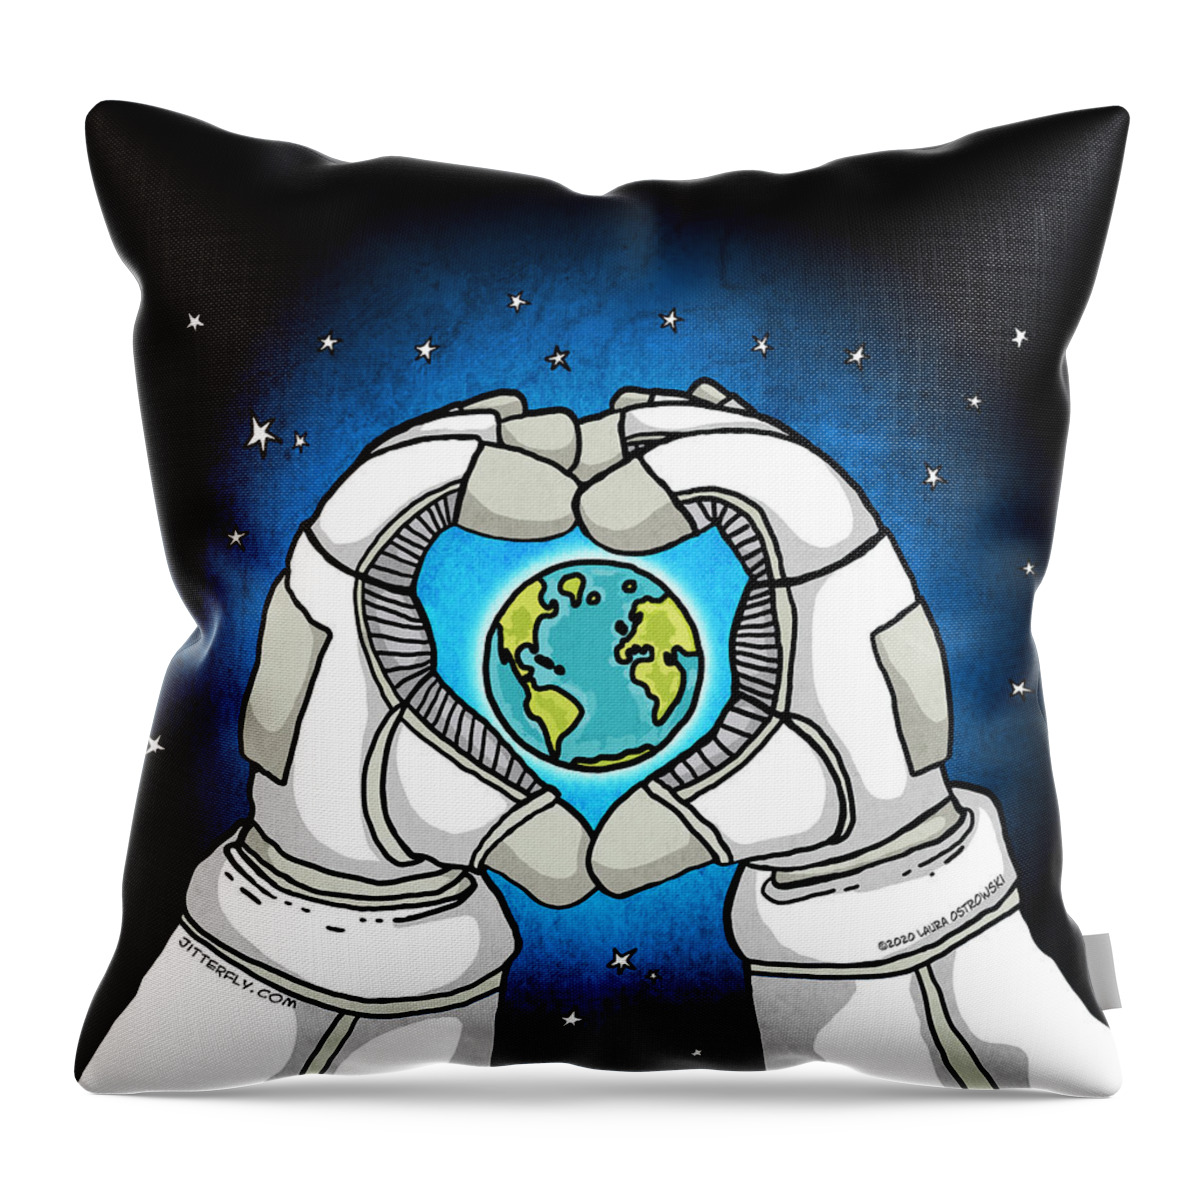 Astronaut Throw Pillow featuring the digital art Astronaut Loves Earth by Laura Ostrowski